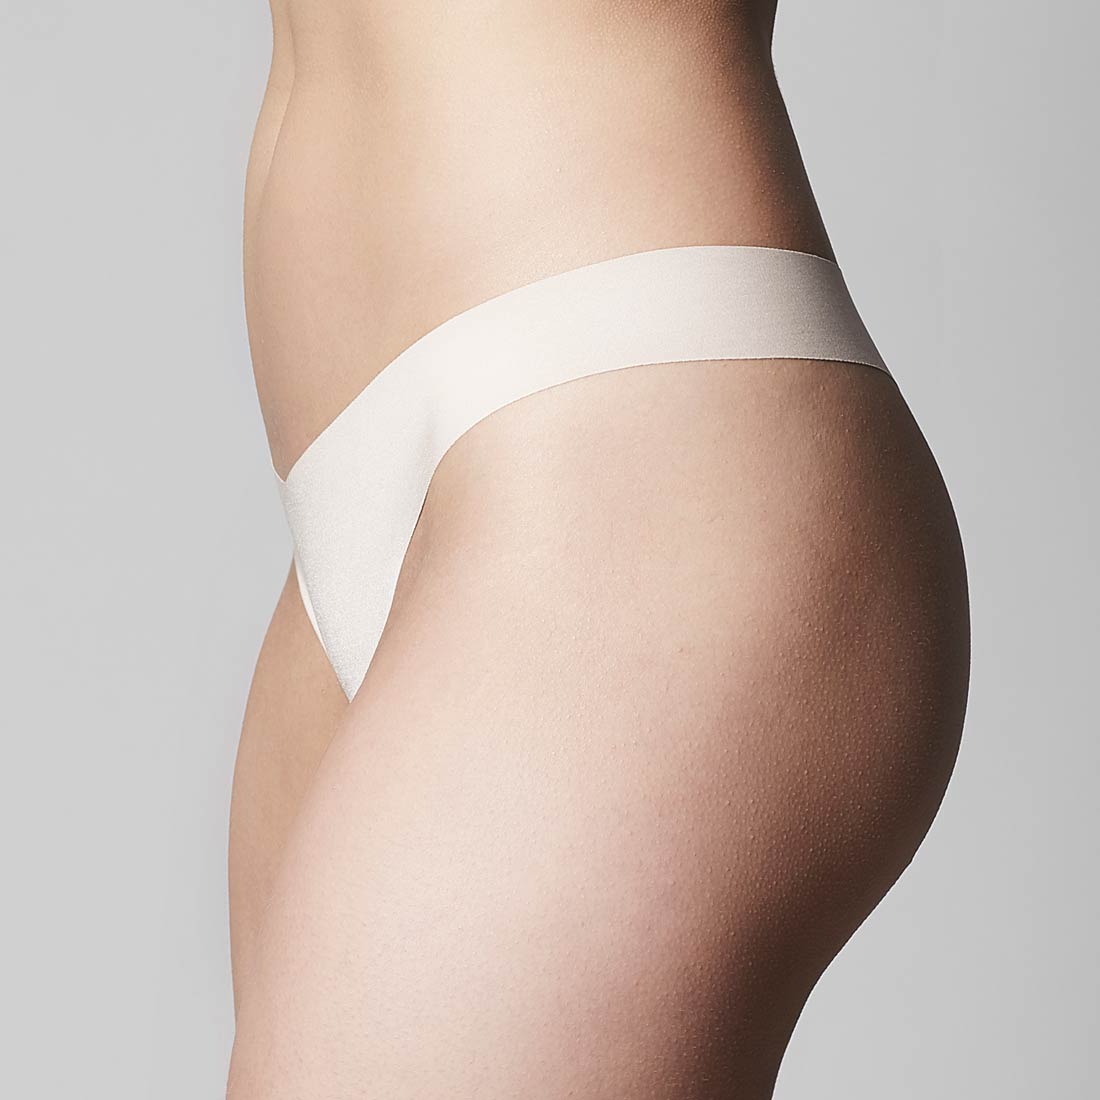 The Knicker Briefs Precision G-String from Illusions Lingerie in Melbourne